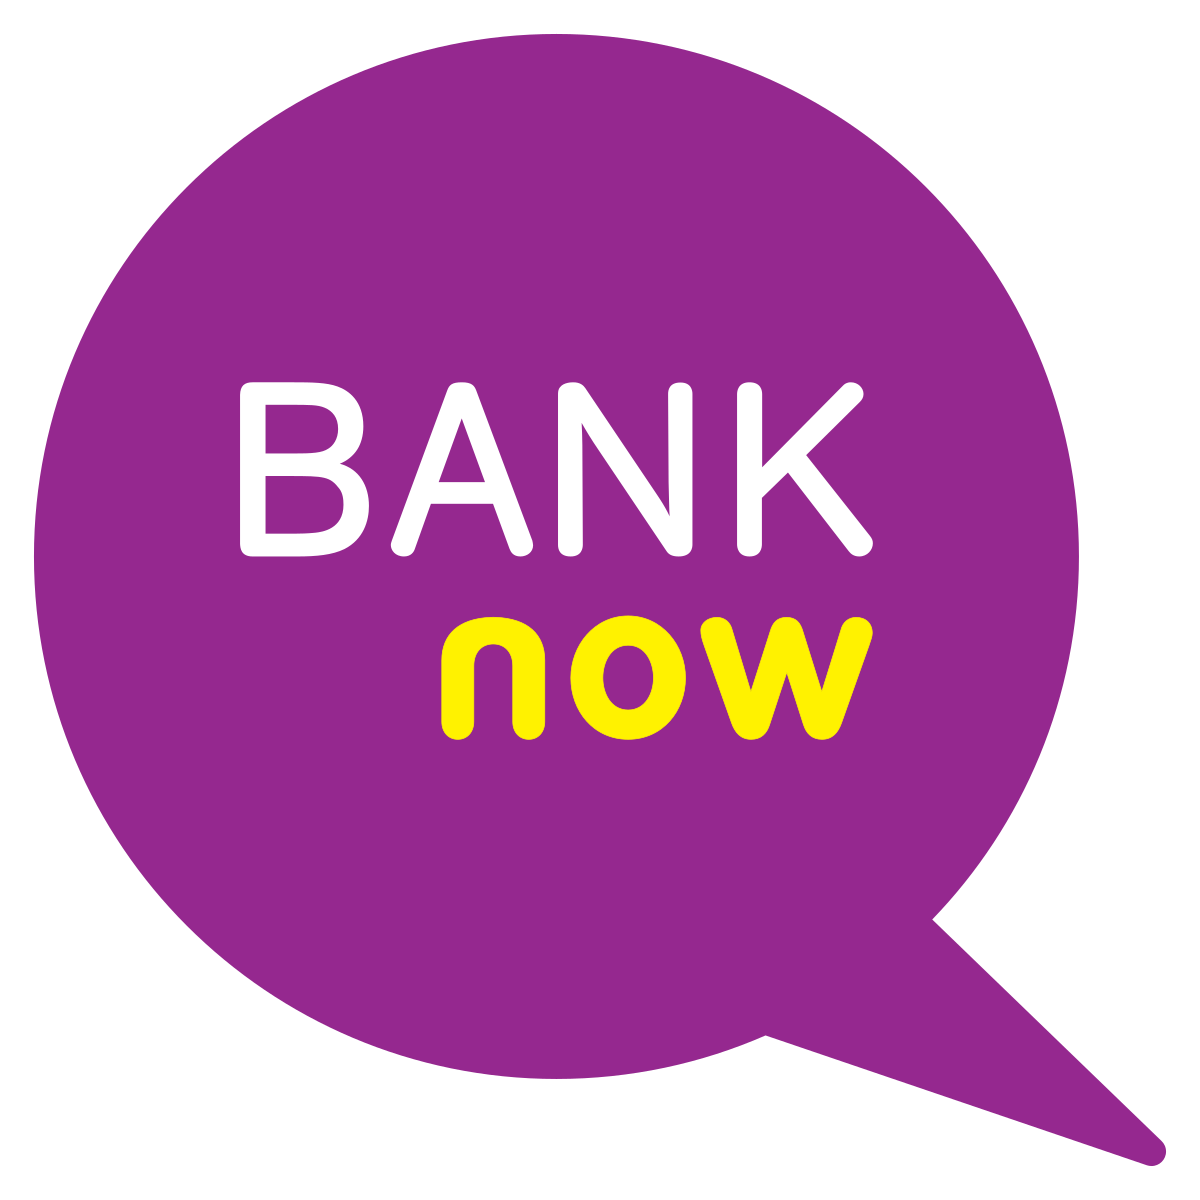 Bank-now - Wikipedia